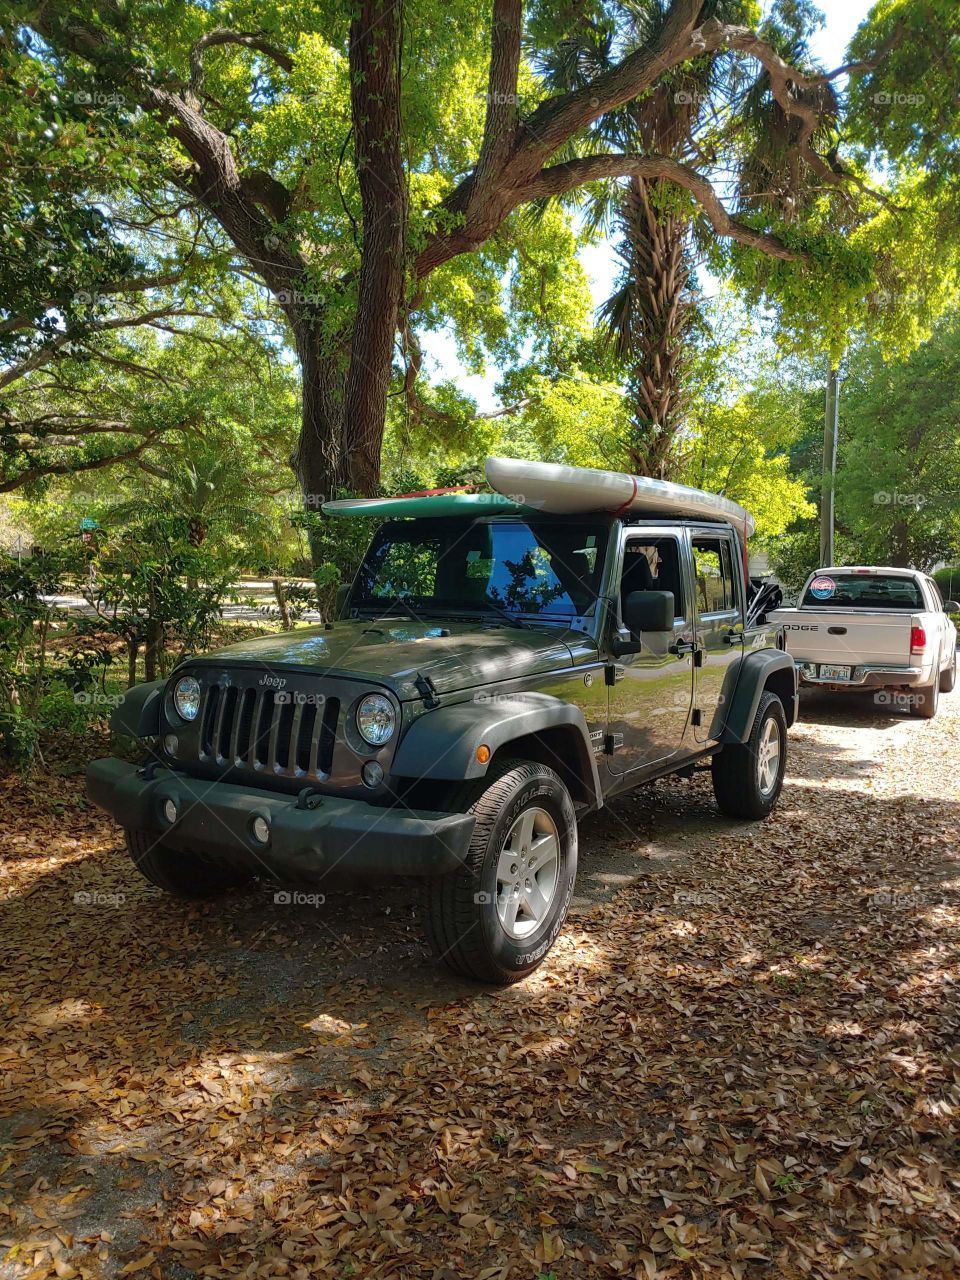 the jeeps all loaded up! cant wait to get out